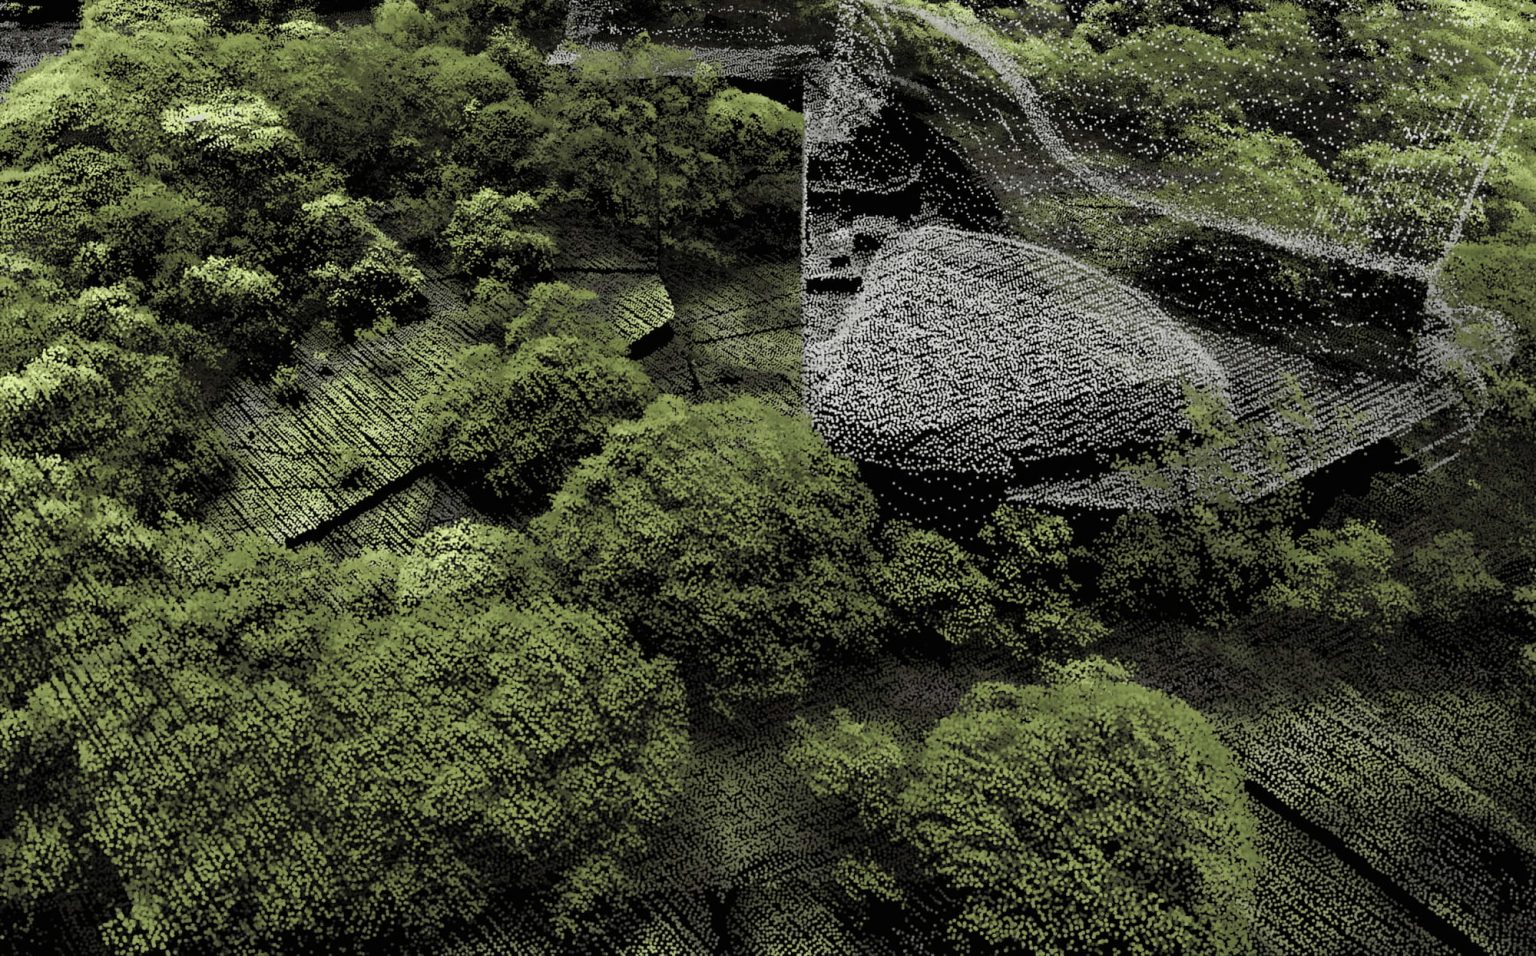 LiDar image of a building surrounded by a forest.